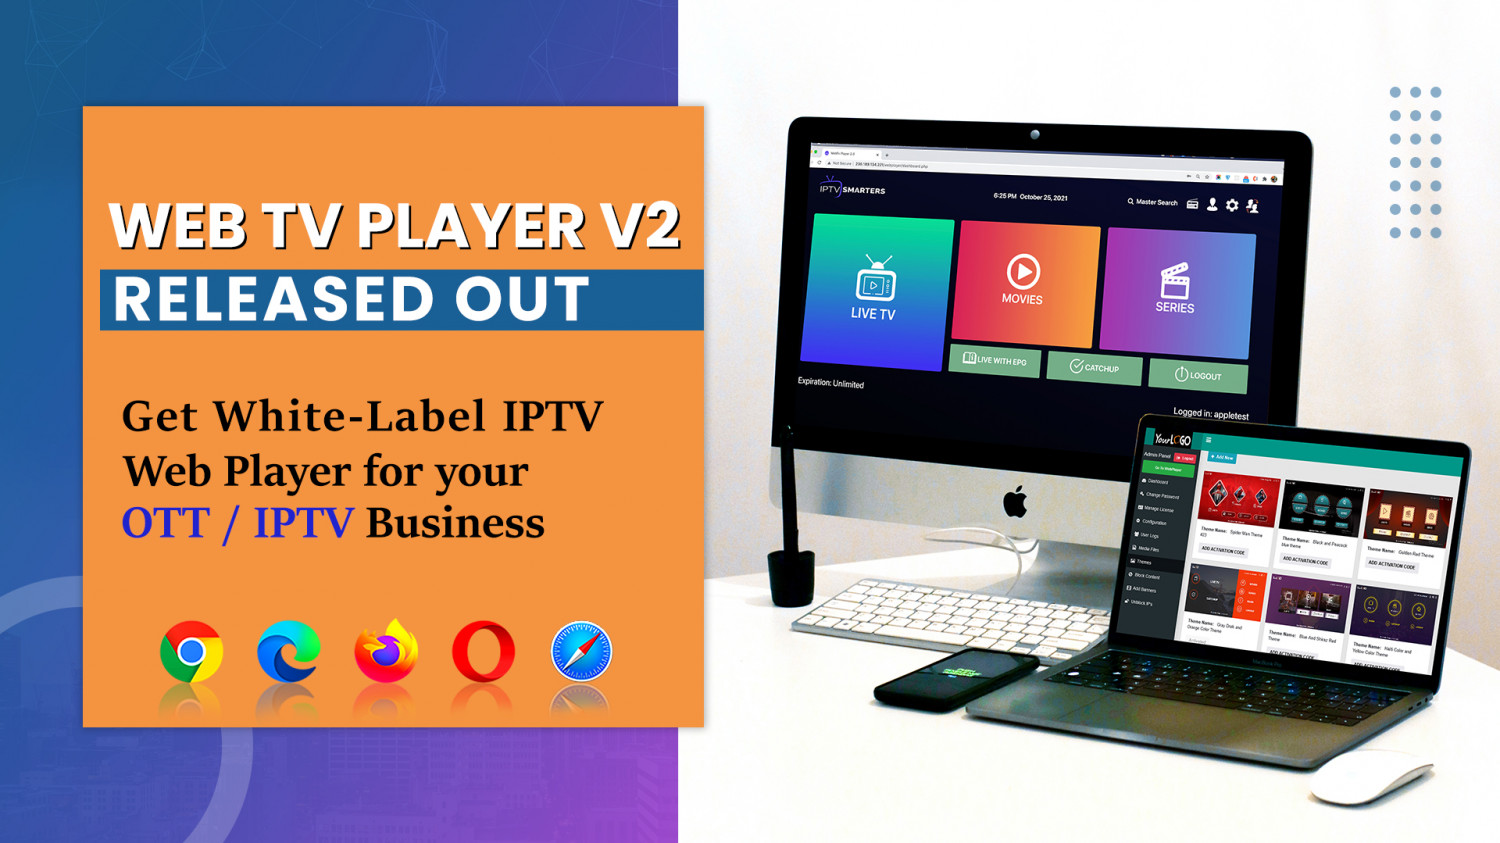 New IPTV Smarters Web TV Player V2.0 Launched With Exclusive Features & More Secured Infographic